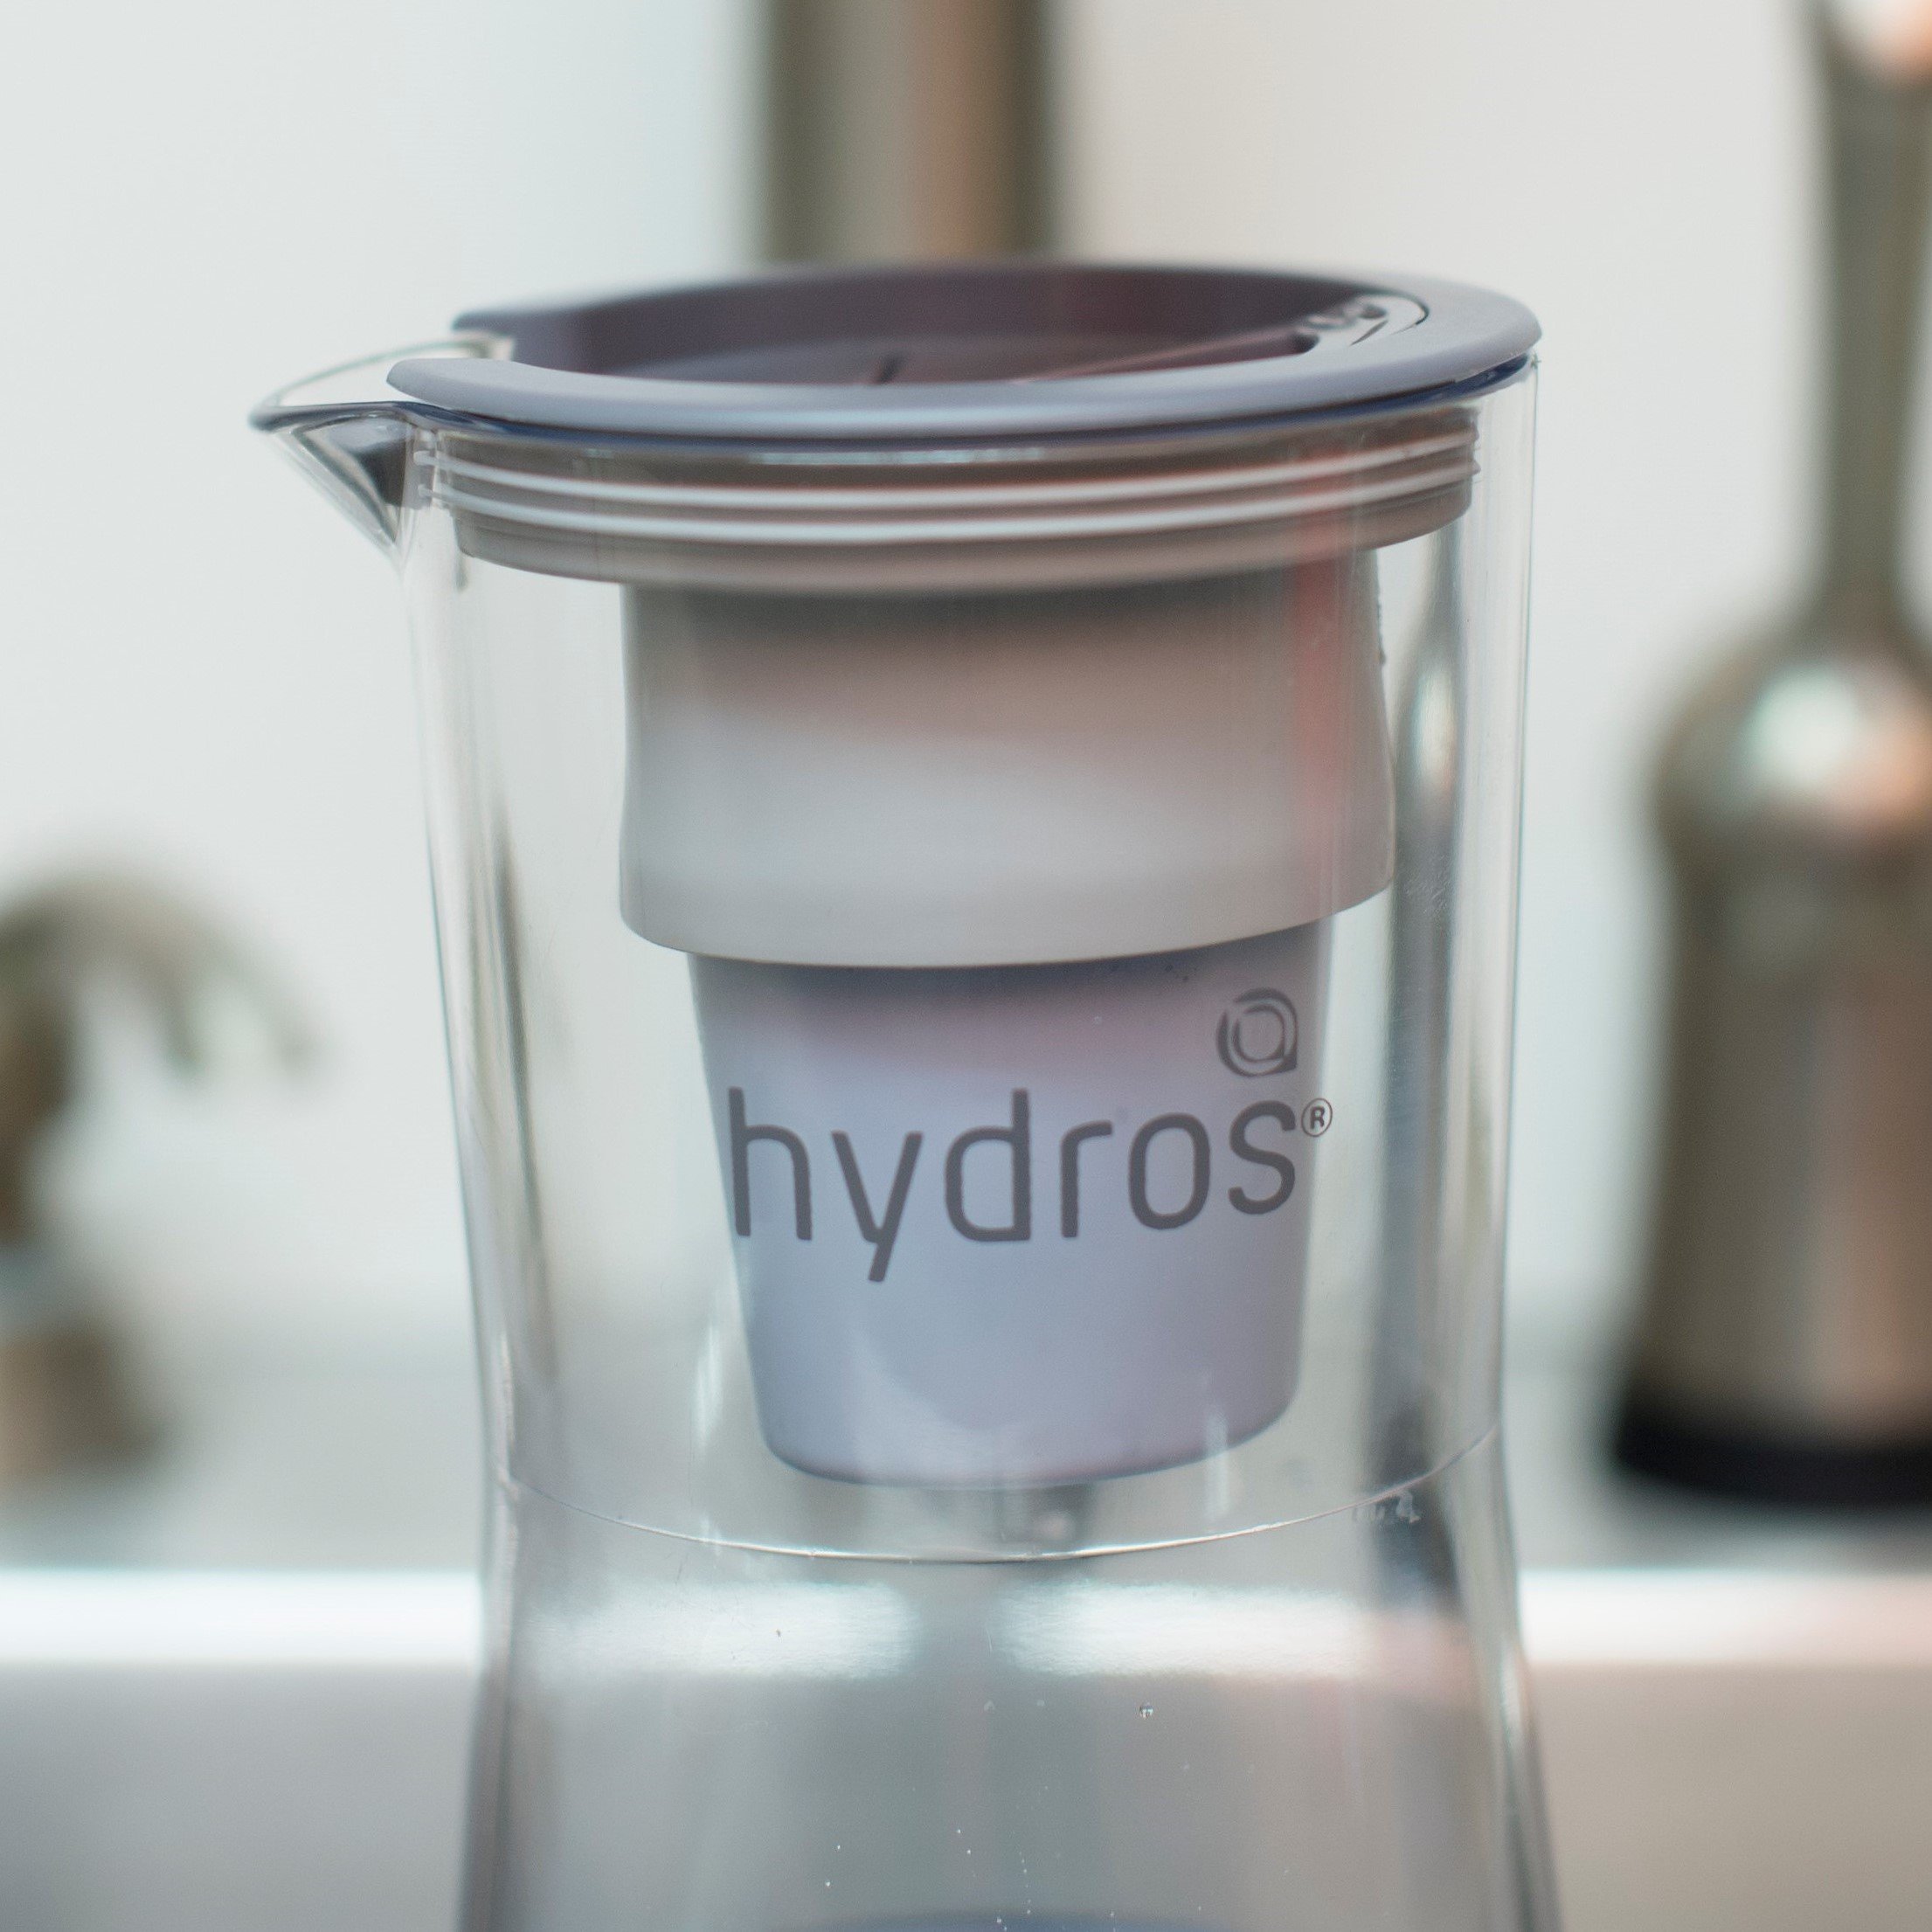 Hydros Water Filter Product Innovation